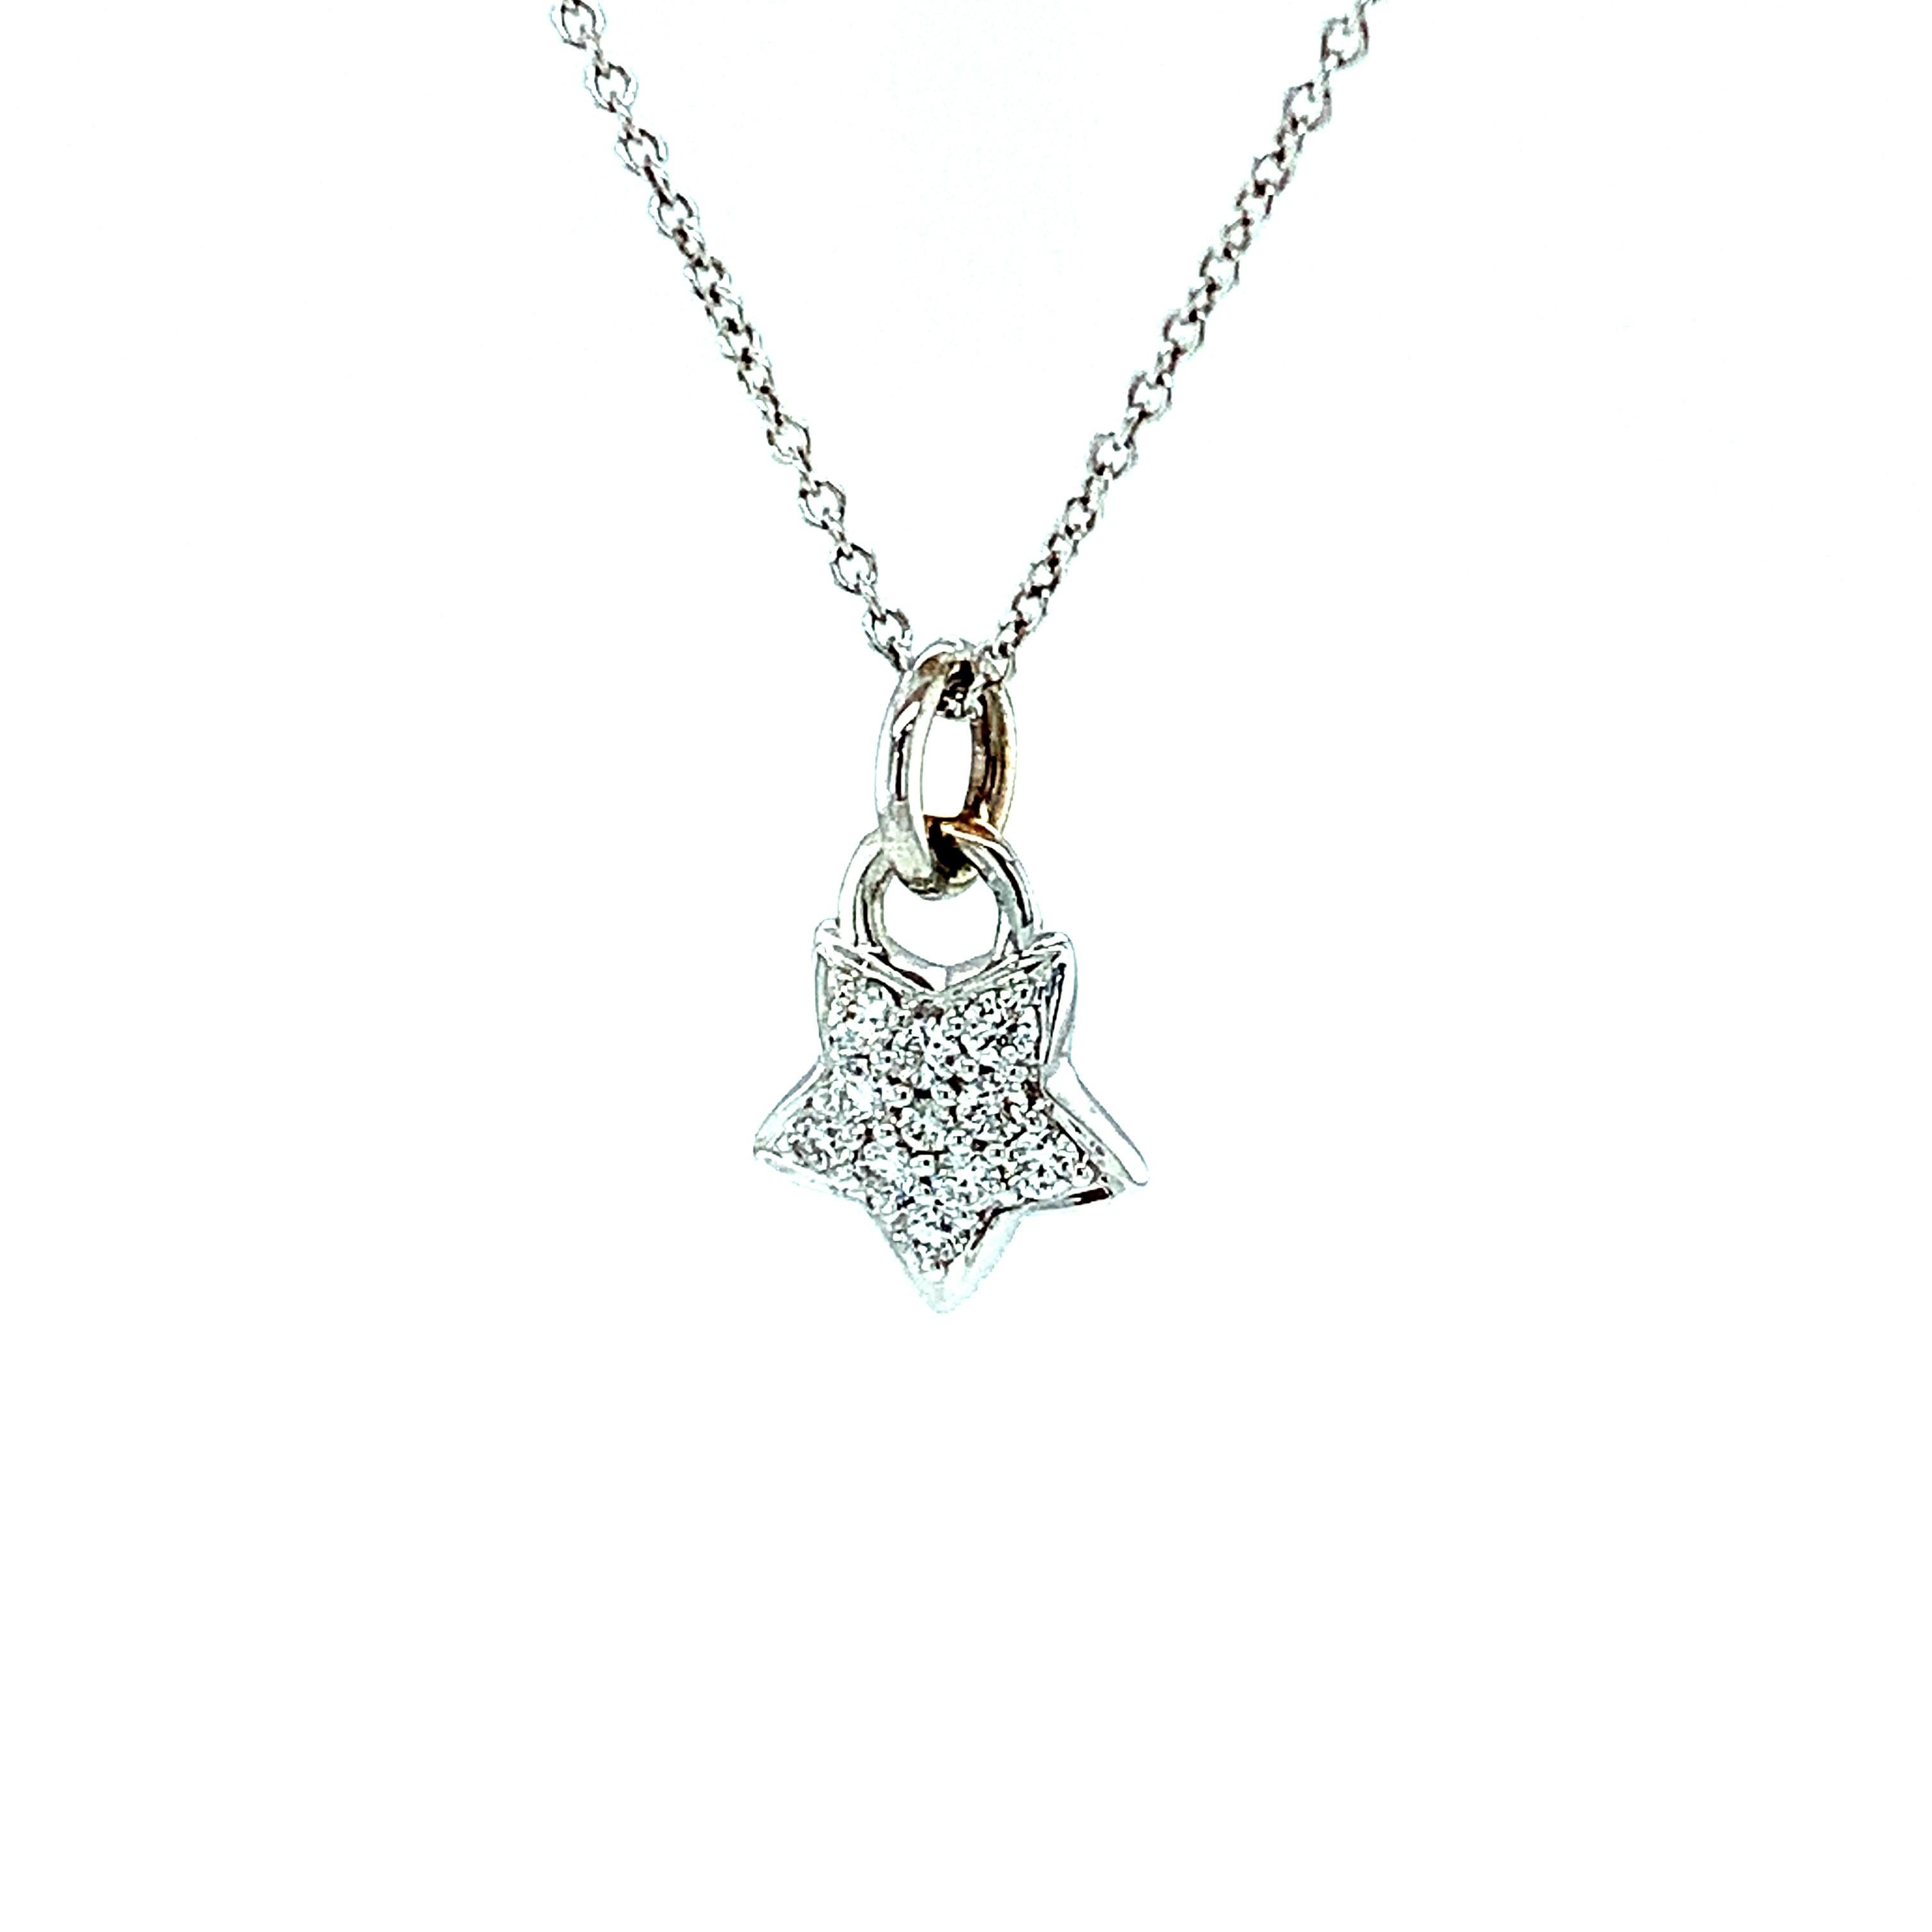 Brilliant Cut Diamond and White Gold Dancing Star Pendant Necklace with Chain